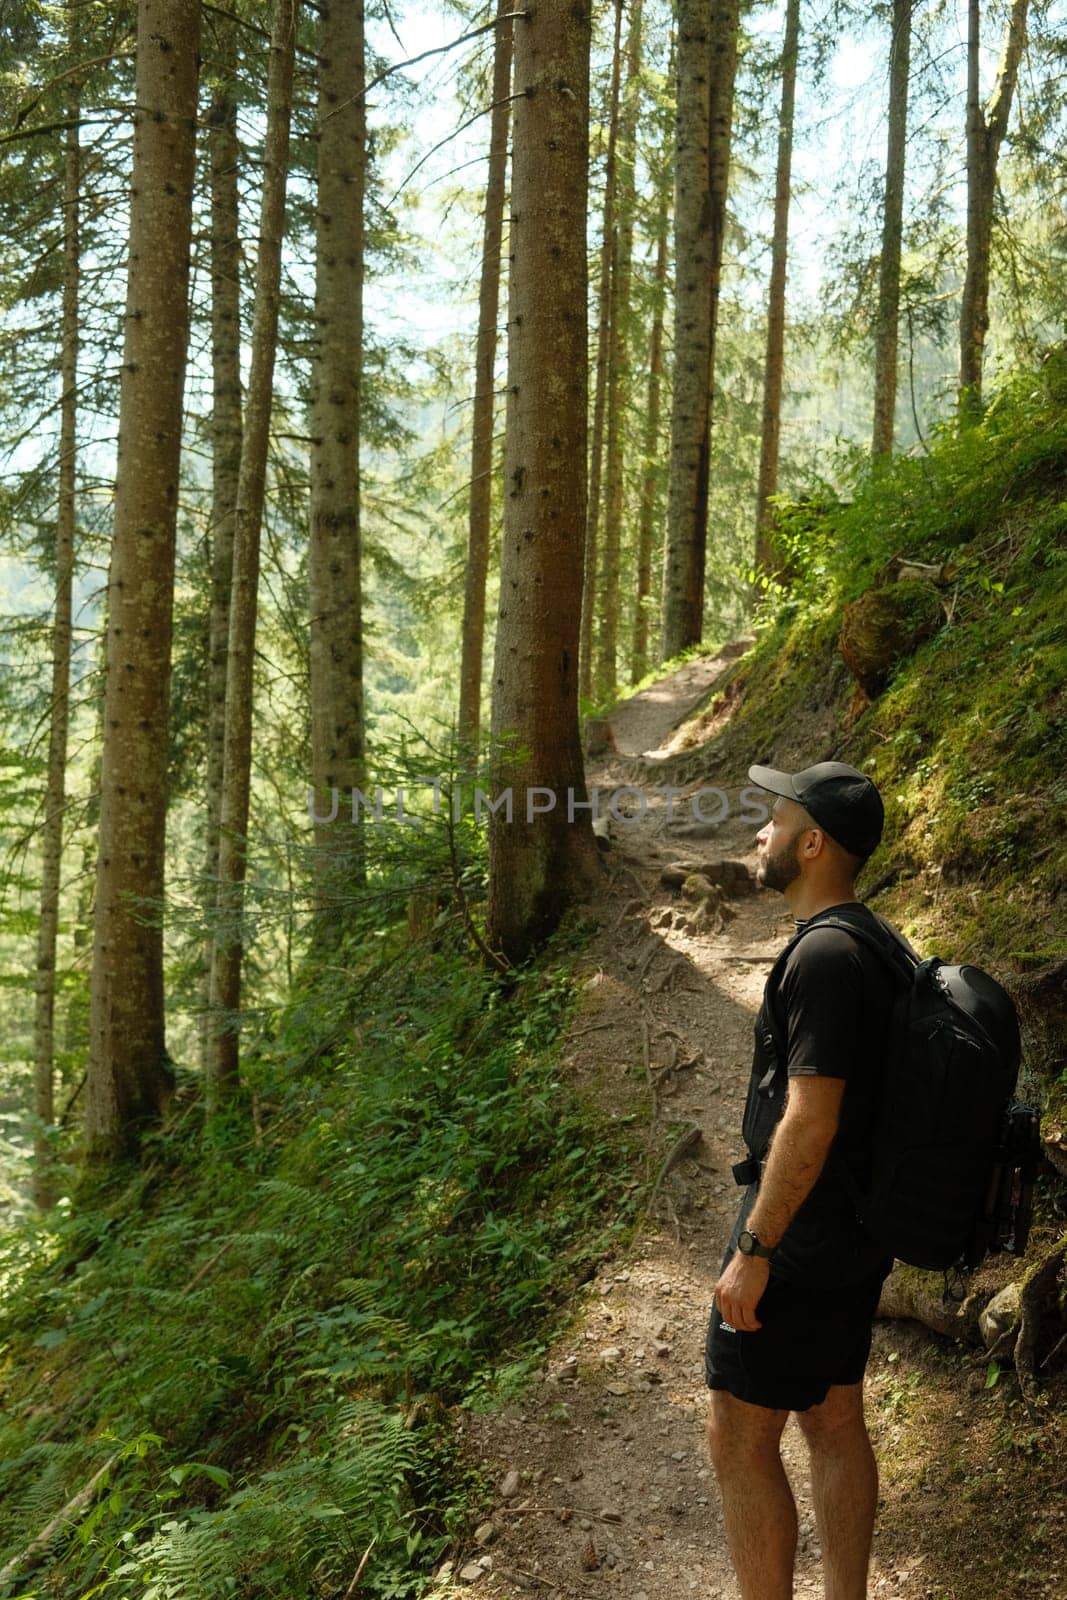 Hiker with cap and black outfit on forest path between trees